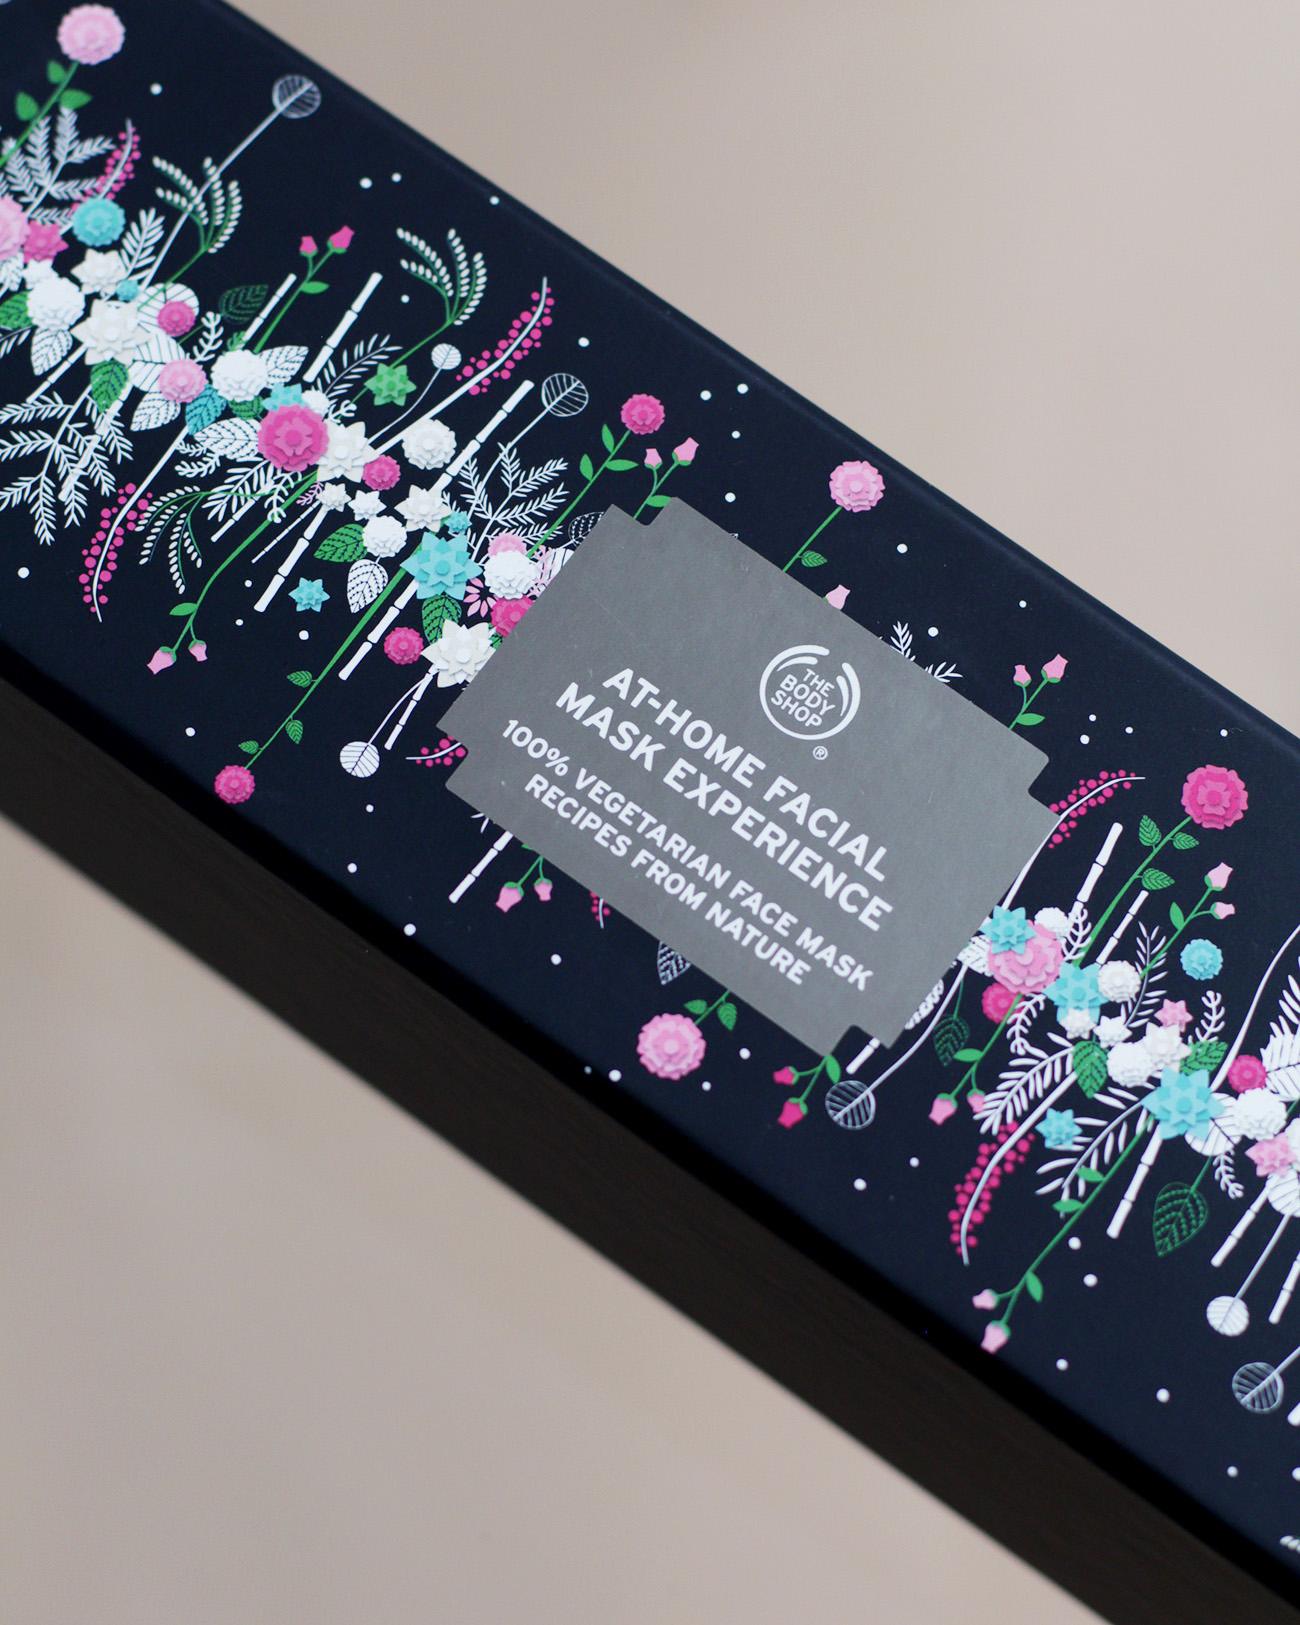 The Body Shop Ultimate Facial Mask Experience